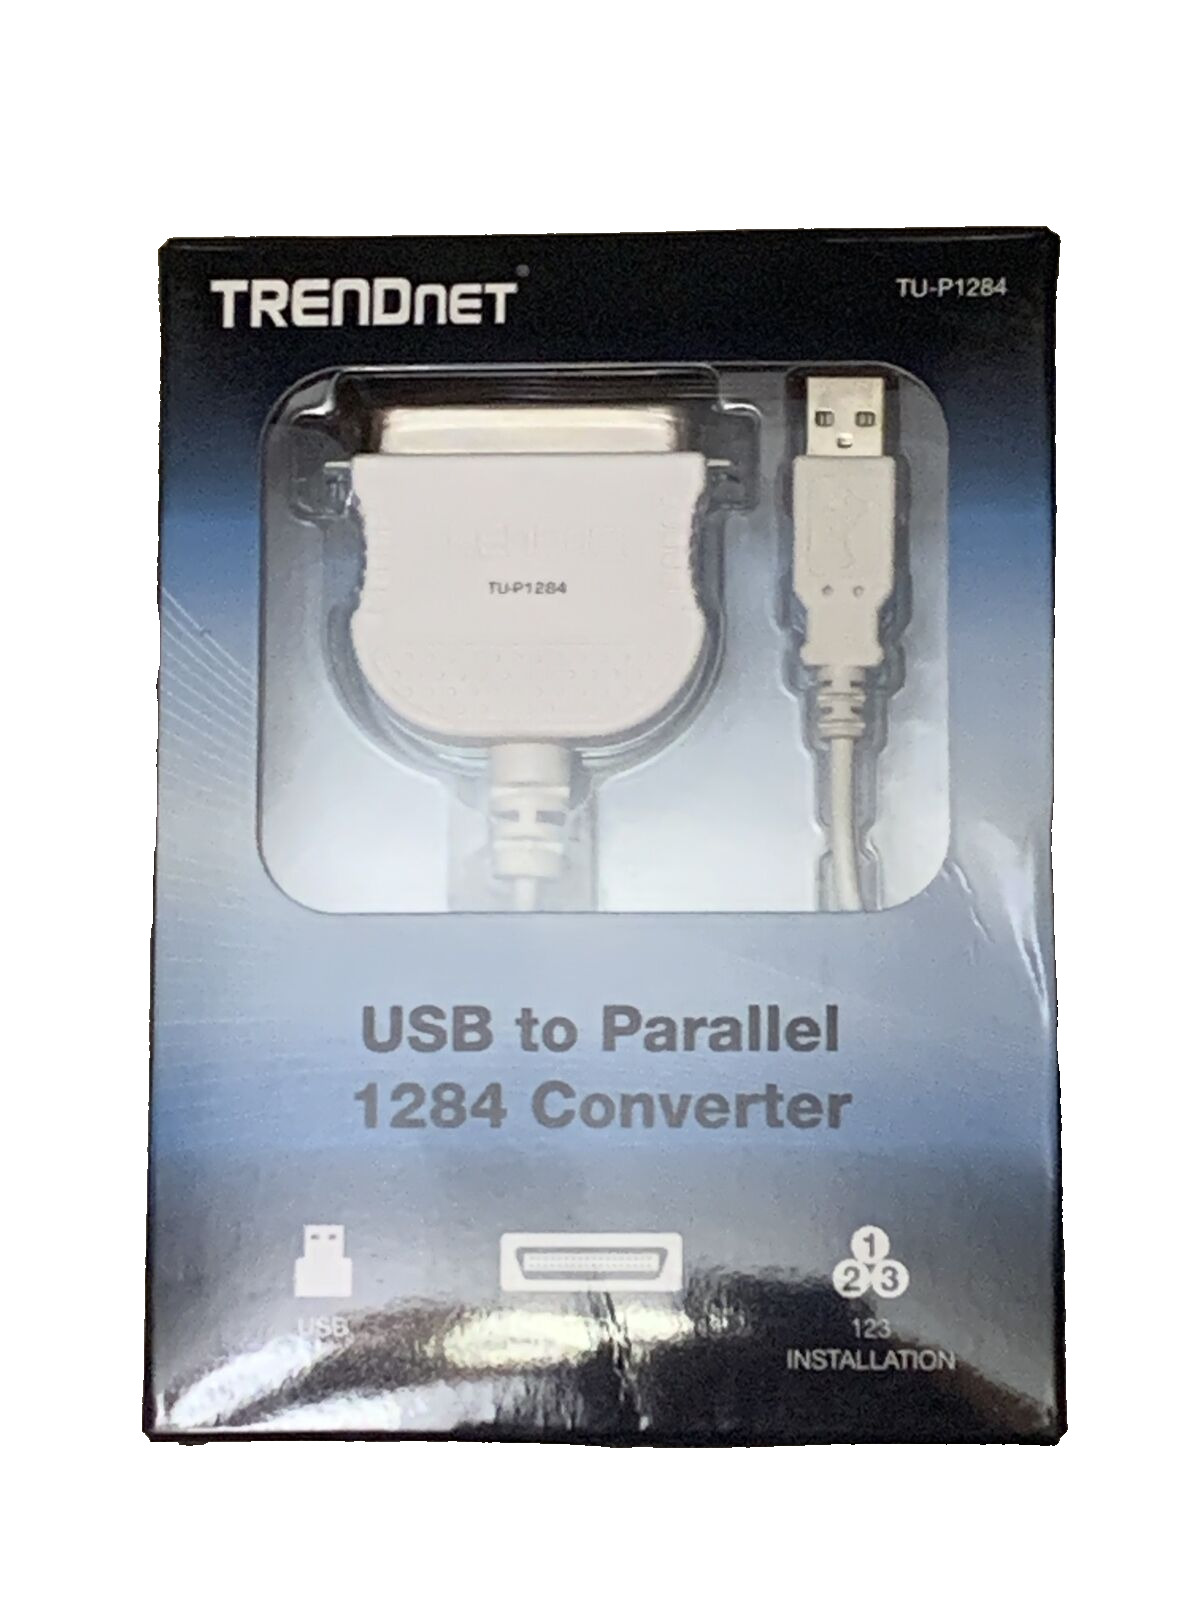 TRENDnet USB to Parallel Printer Cable Converter TU-P1284 New Okidata Tested